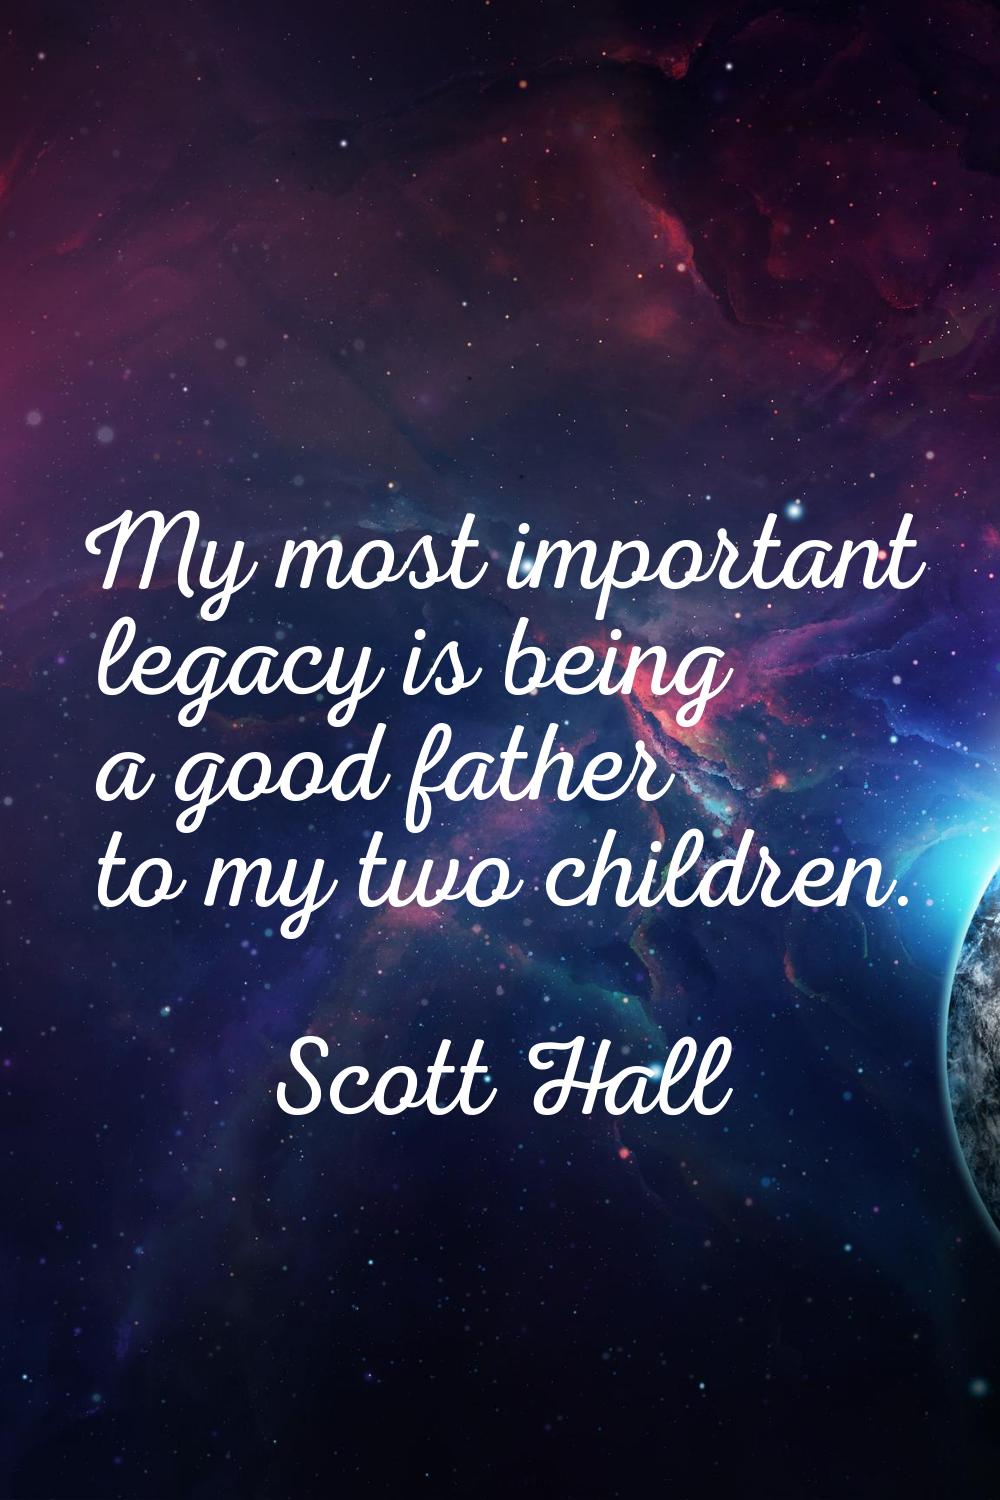 My most important legacy is being a good father to my two children.